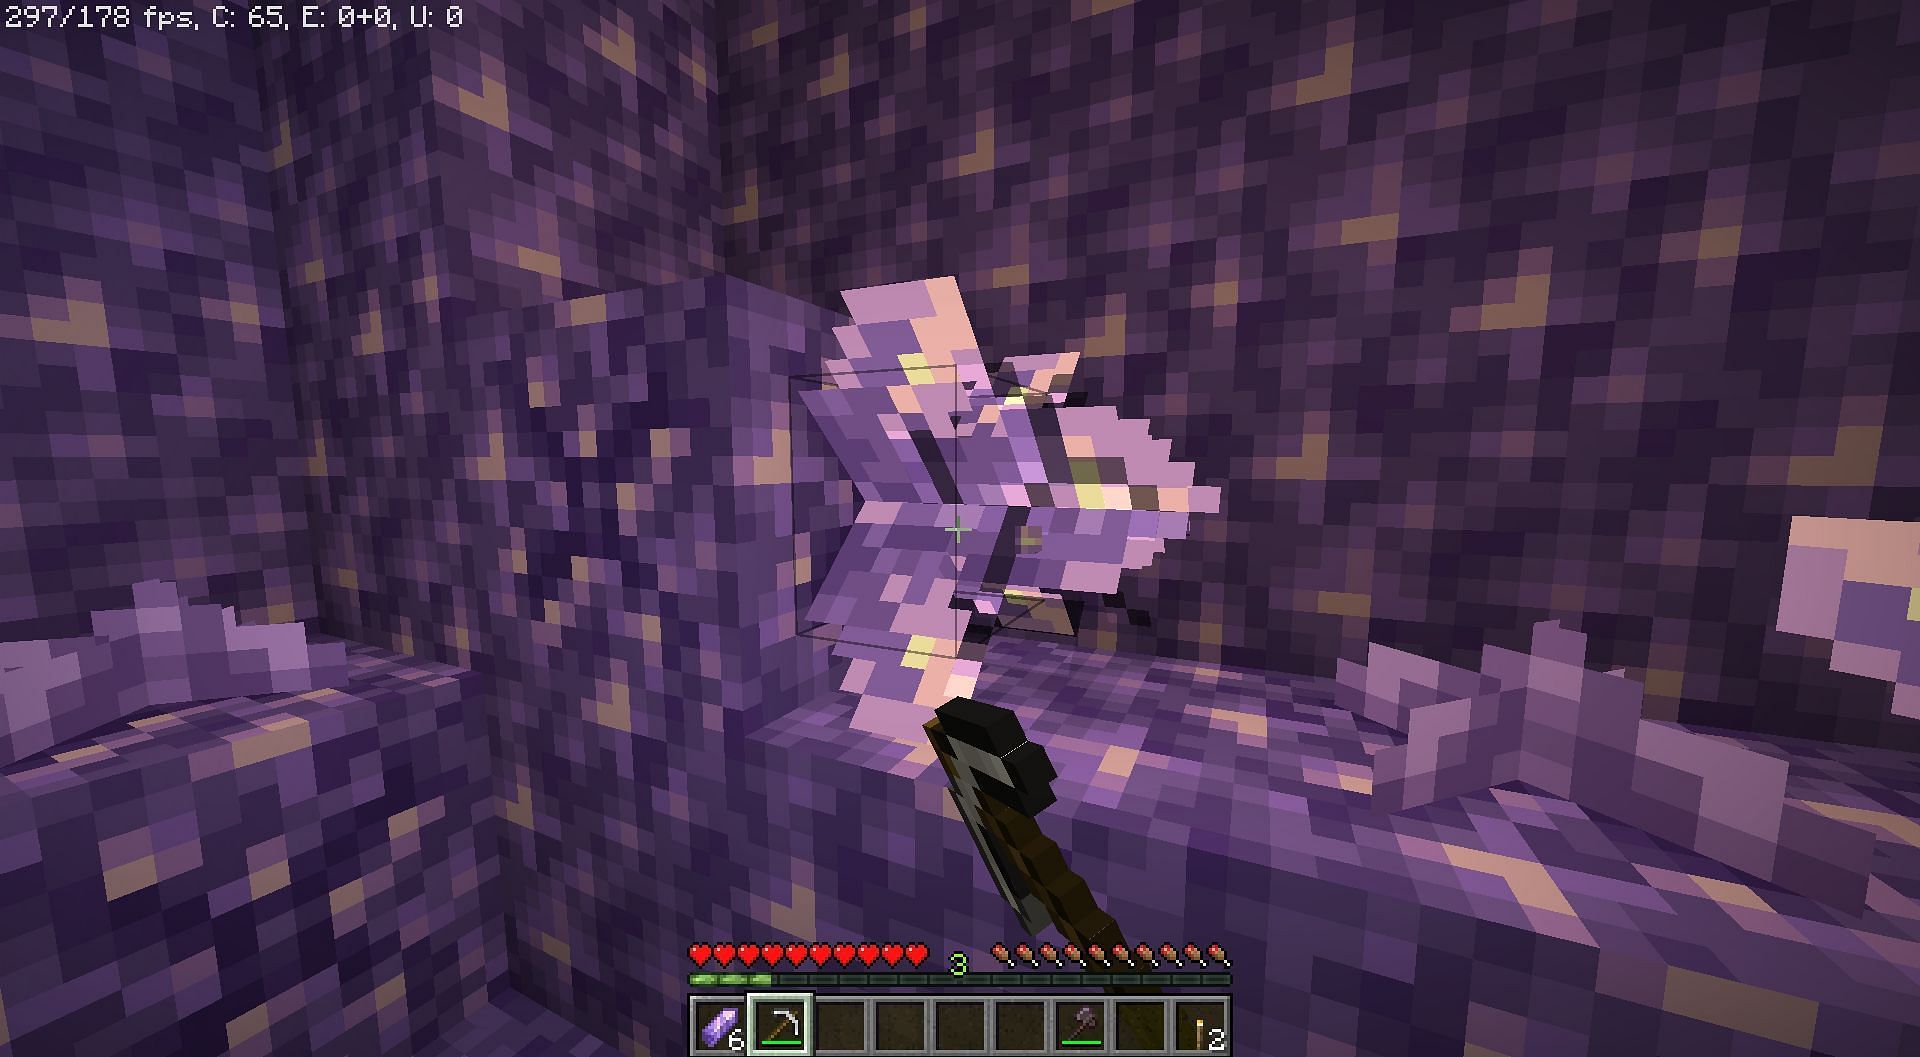 It can be easily mined with a normal pickaxe (Image via Mojang)